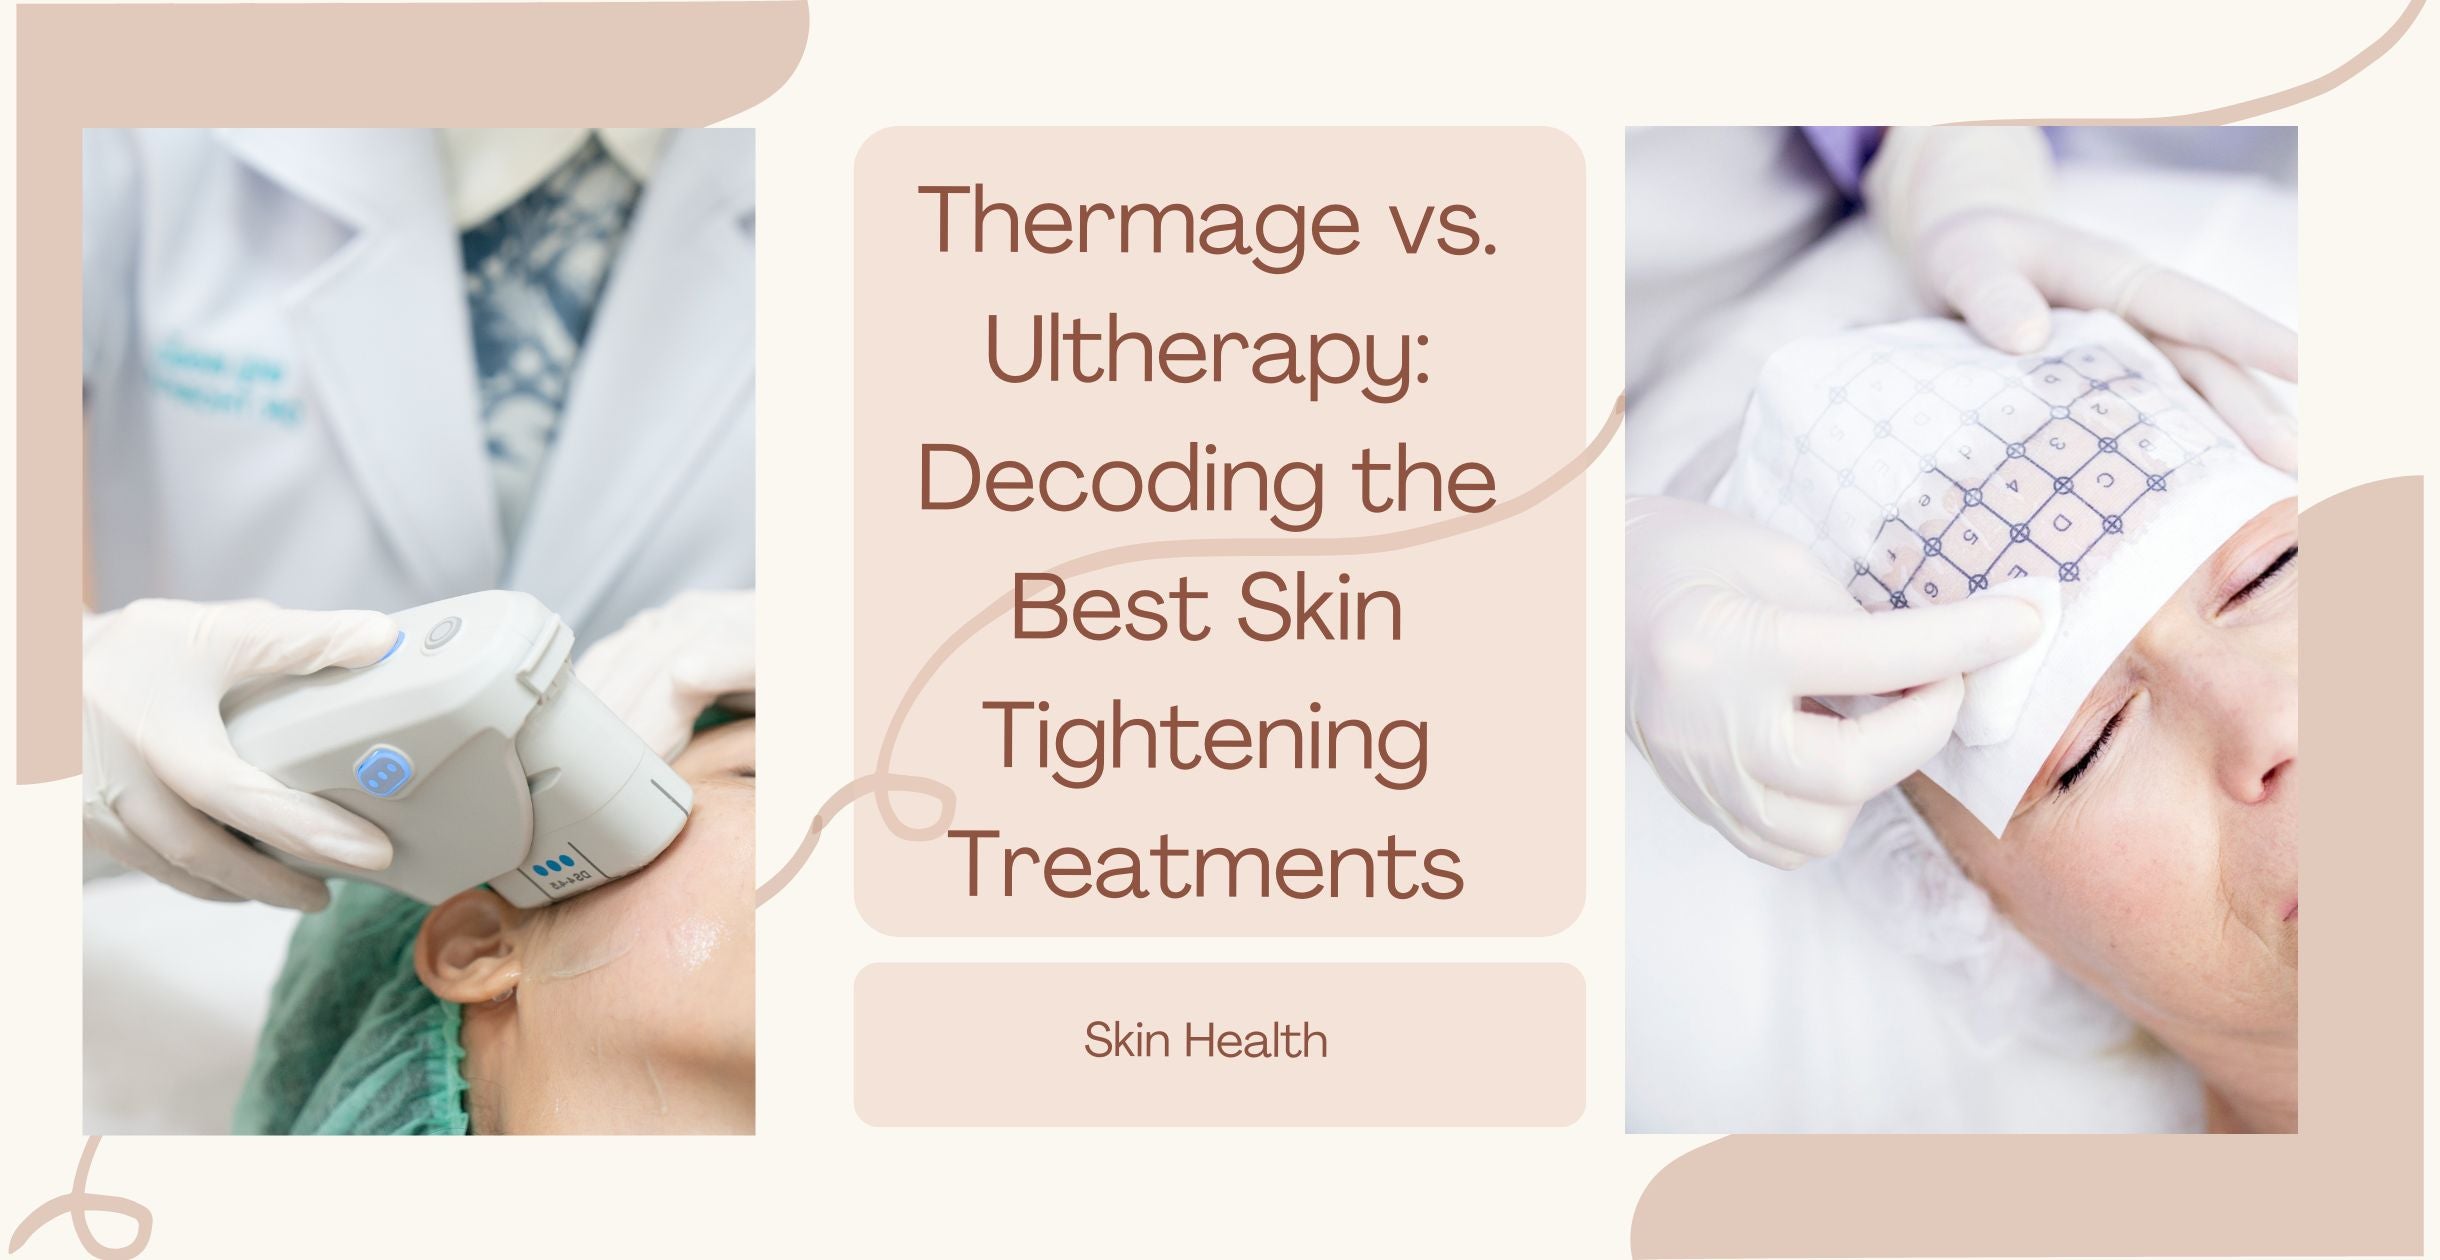 Thermage vs. Ultherapy: Decoding the Best Skin Tightening Treatments